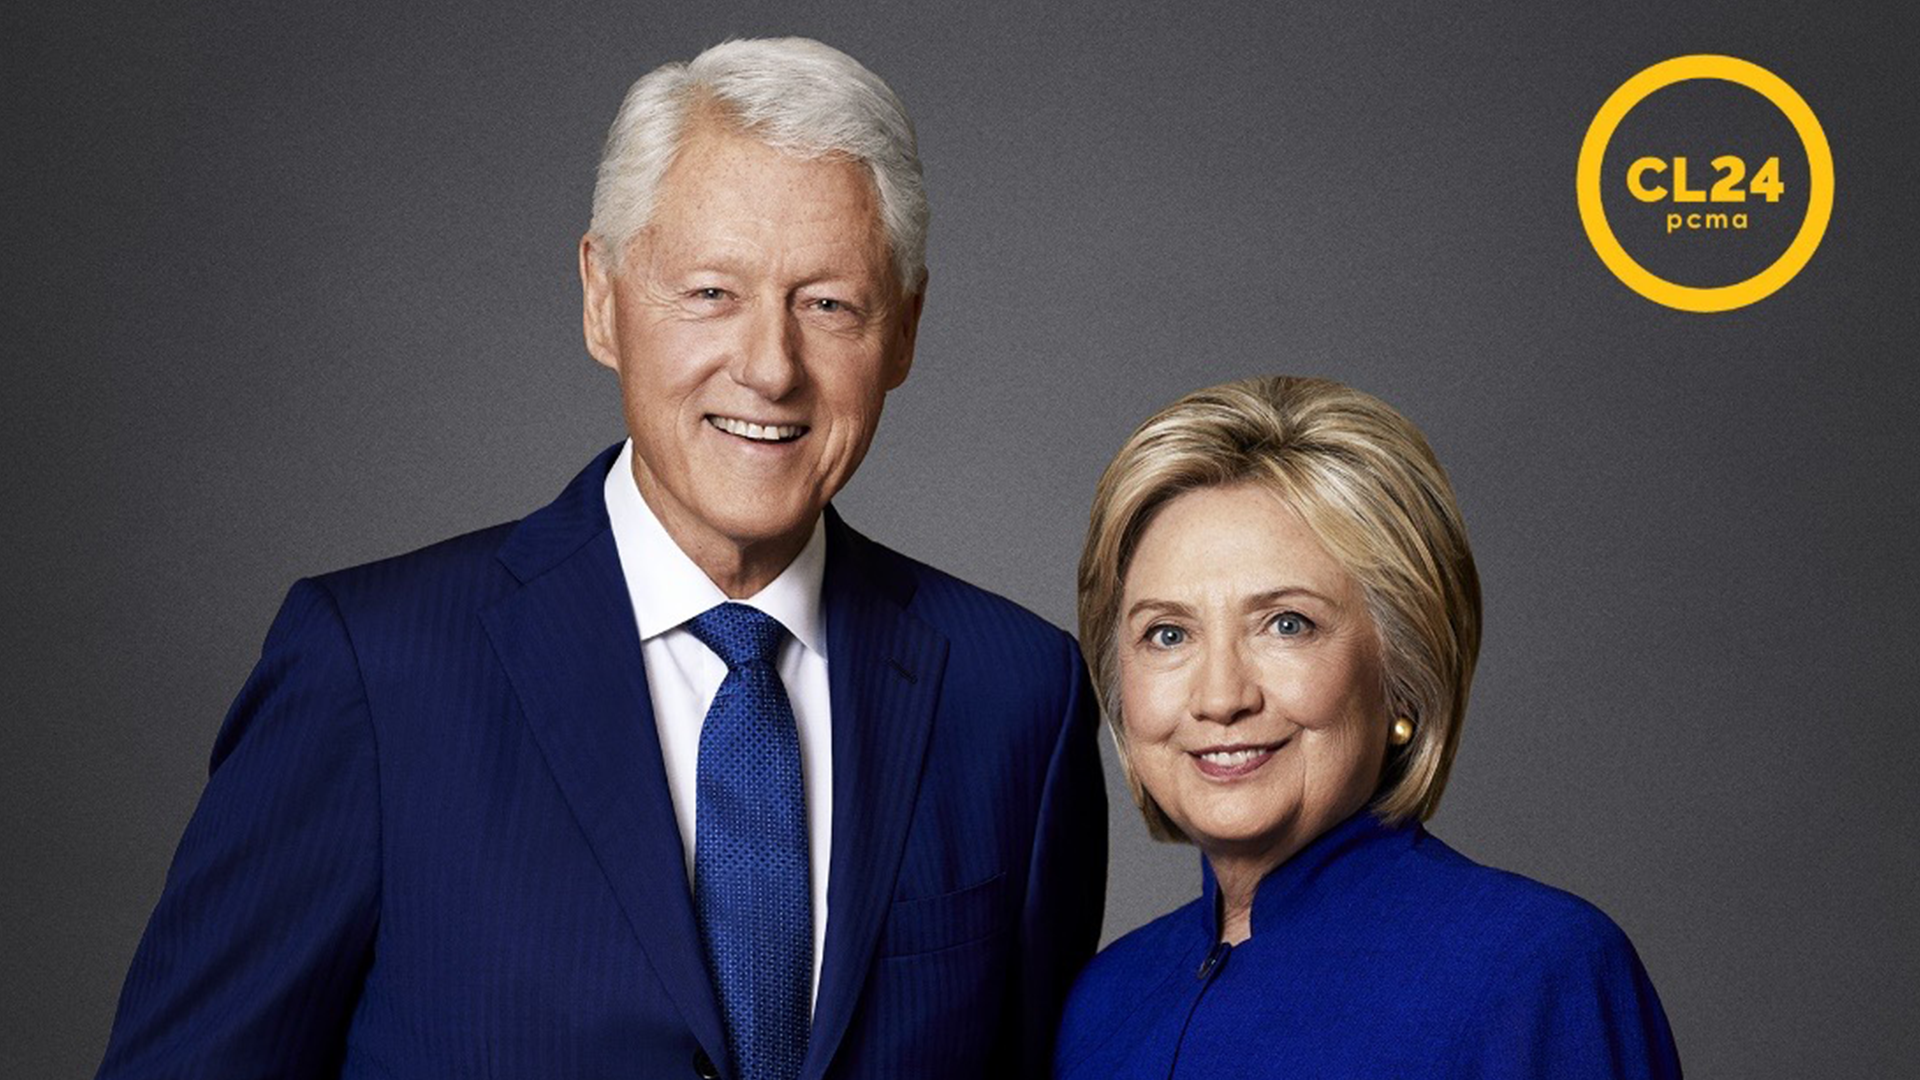 PCMA ANNOUNCES A CONVERSATION WITH PRESIDENT BILL CLINTON AND 67th